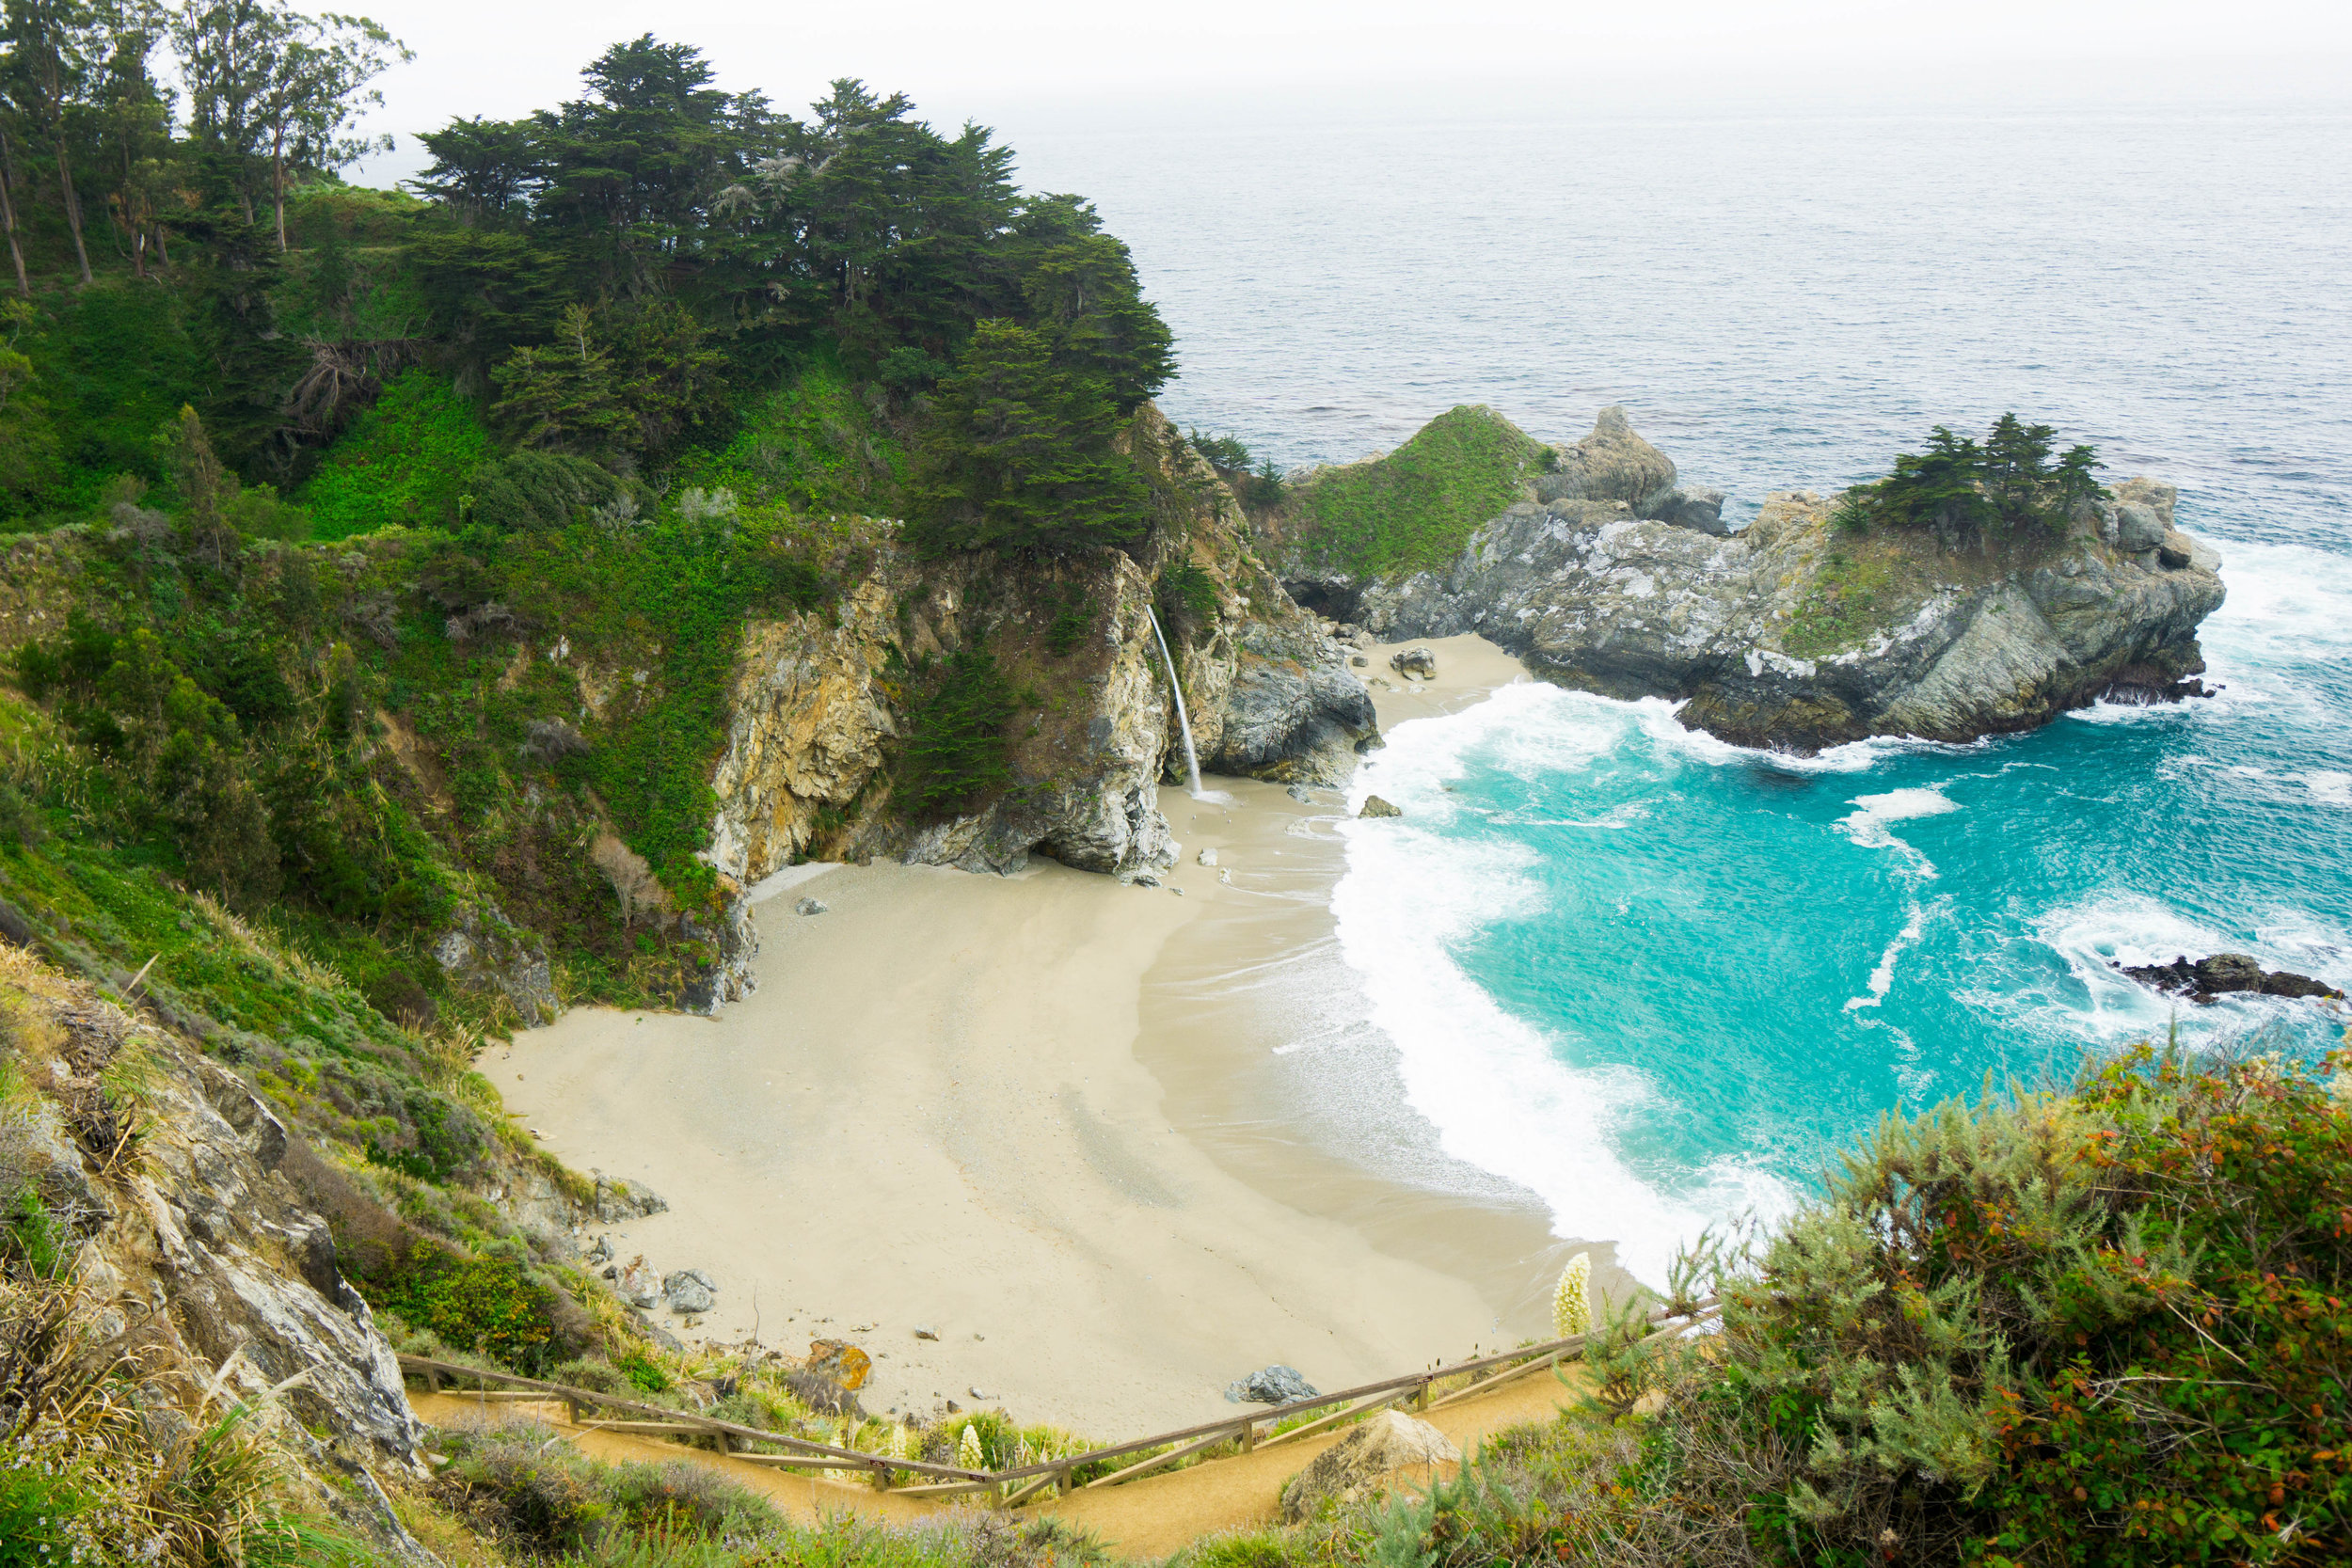 Stopped to enjoy the one-of-a-kind McWay Falls